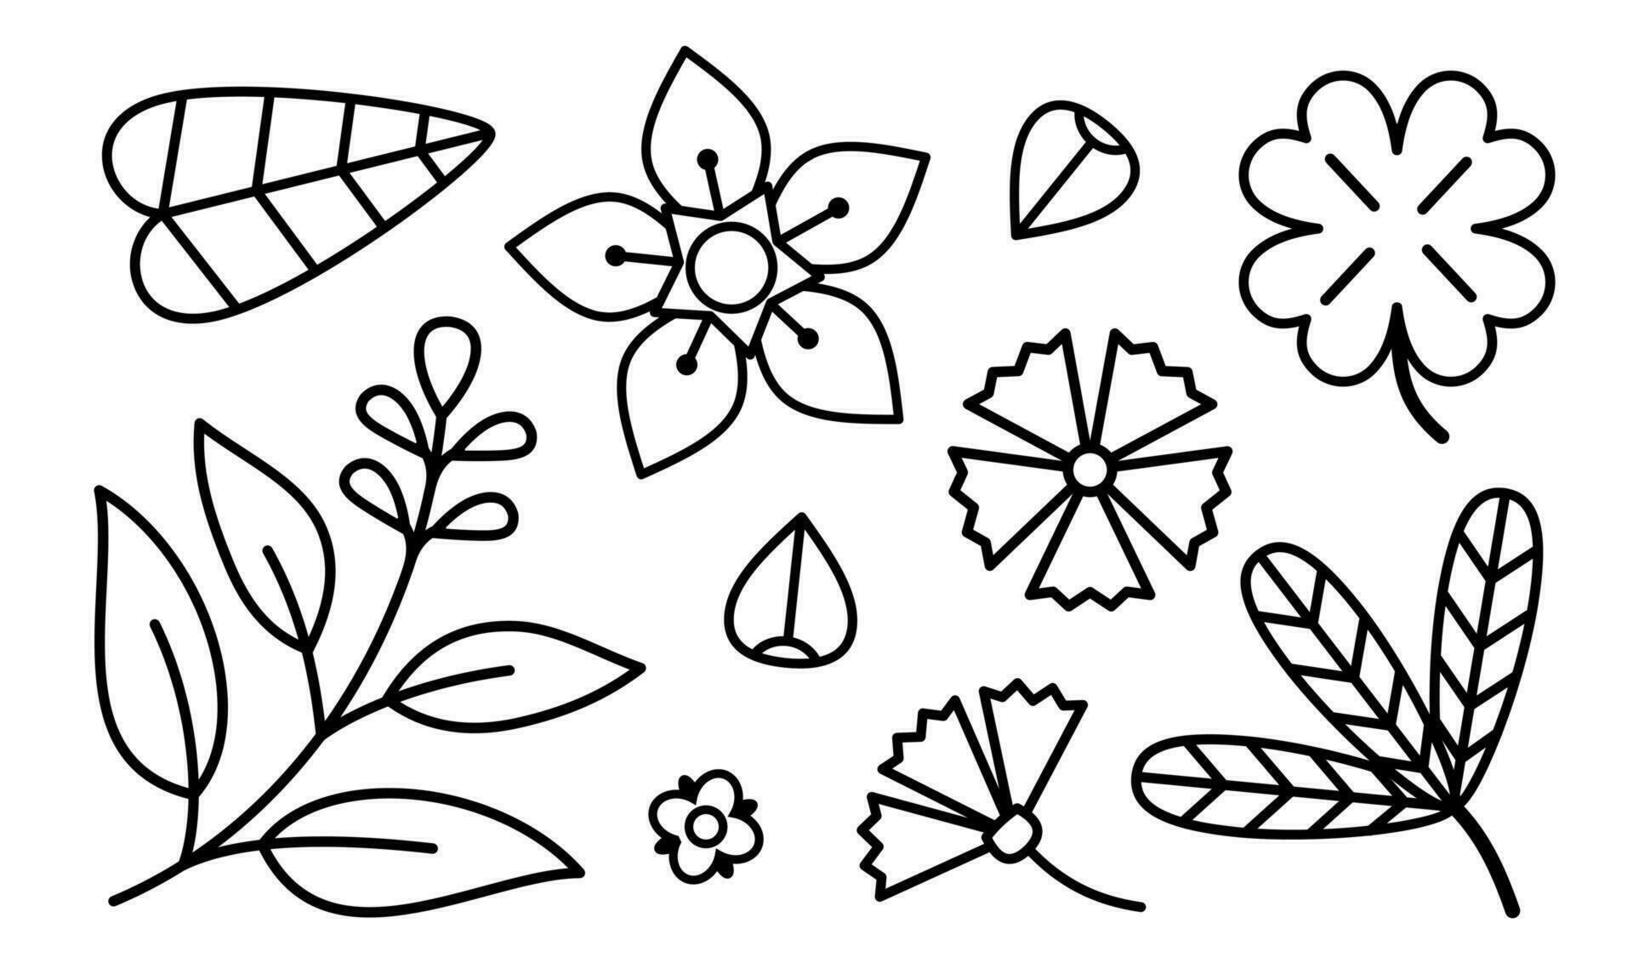 A set of flowers and leaves drawn with a line. Icons of plants and herbs. Vector illustration